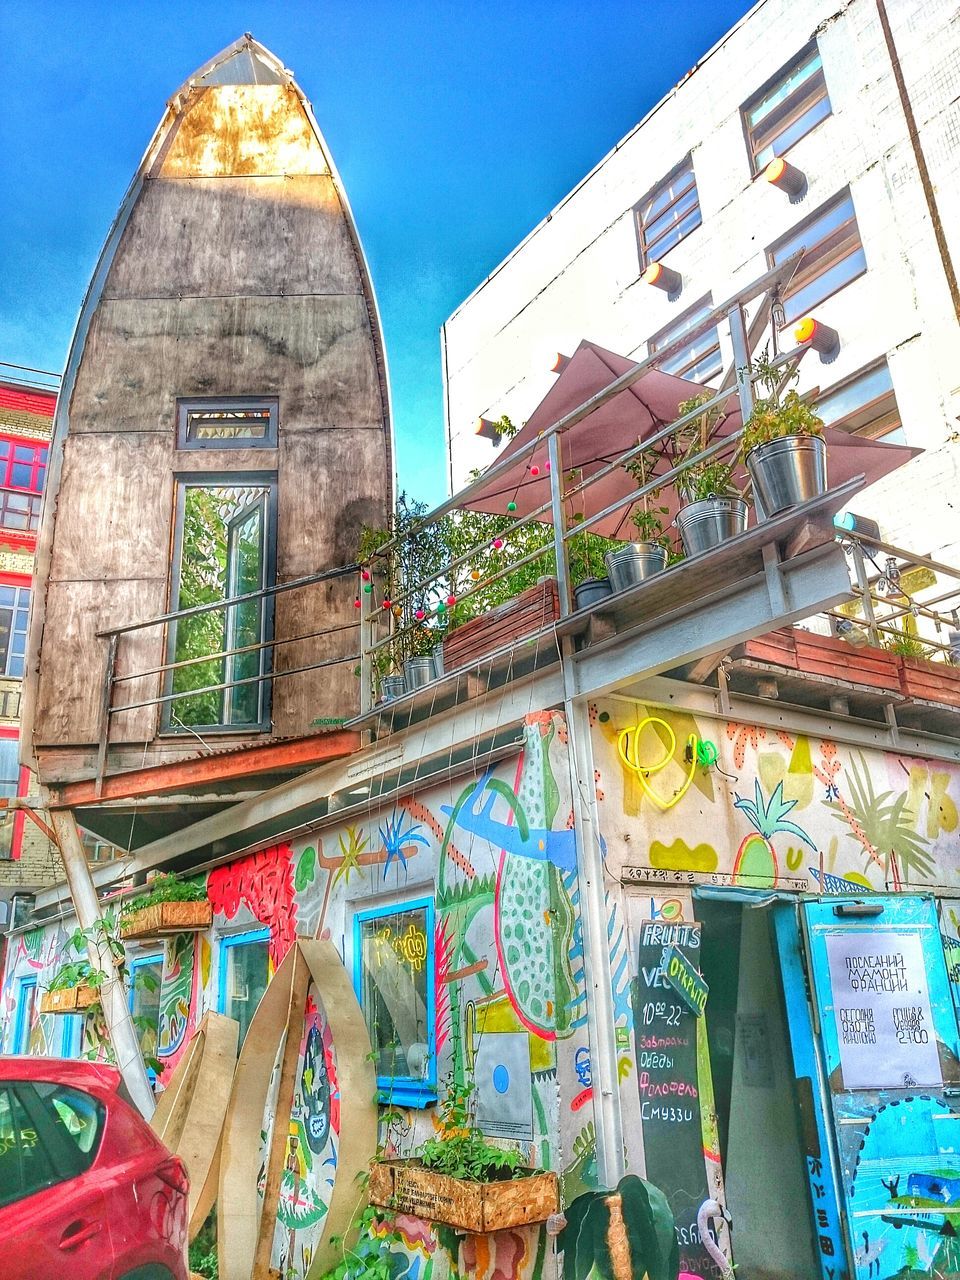 architecture, built structure, building exterior, low angle view, blue, window, building, arch, graffiti, clear sky, text, wall - building feature, day, residential structure, outdoors, facade, residential building, multi colored, sky, no people